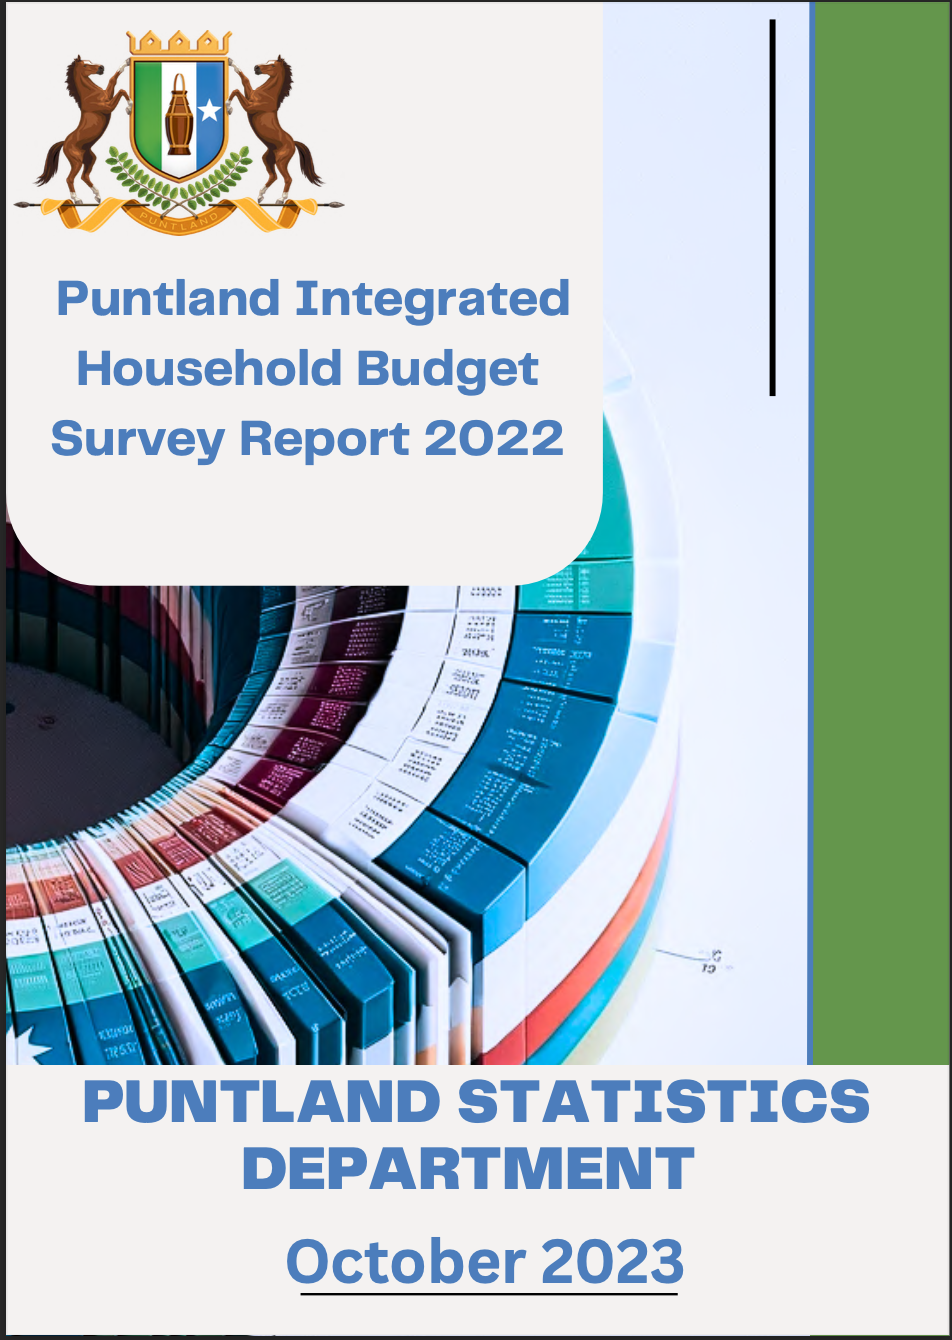 Puntland Integrated Household Budget Survey Report 2022